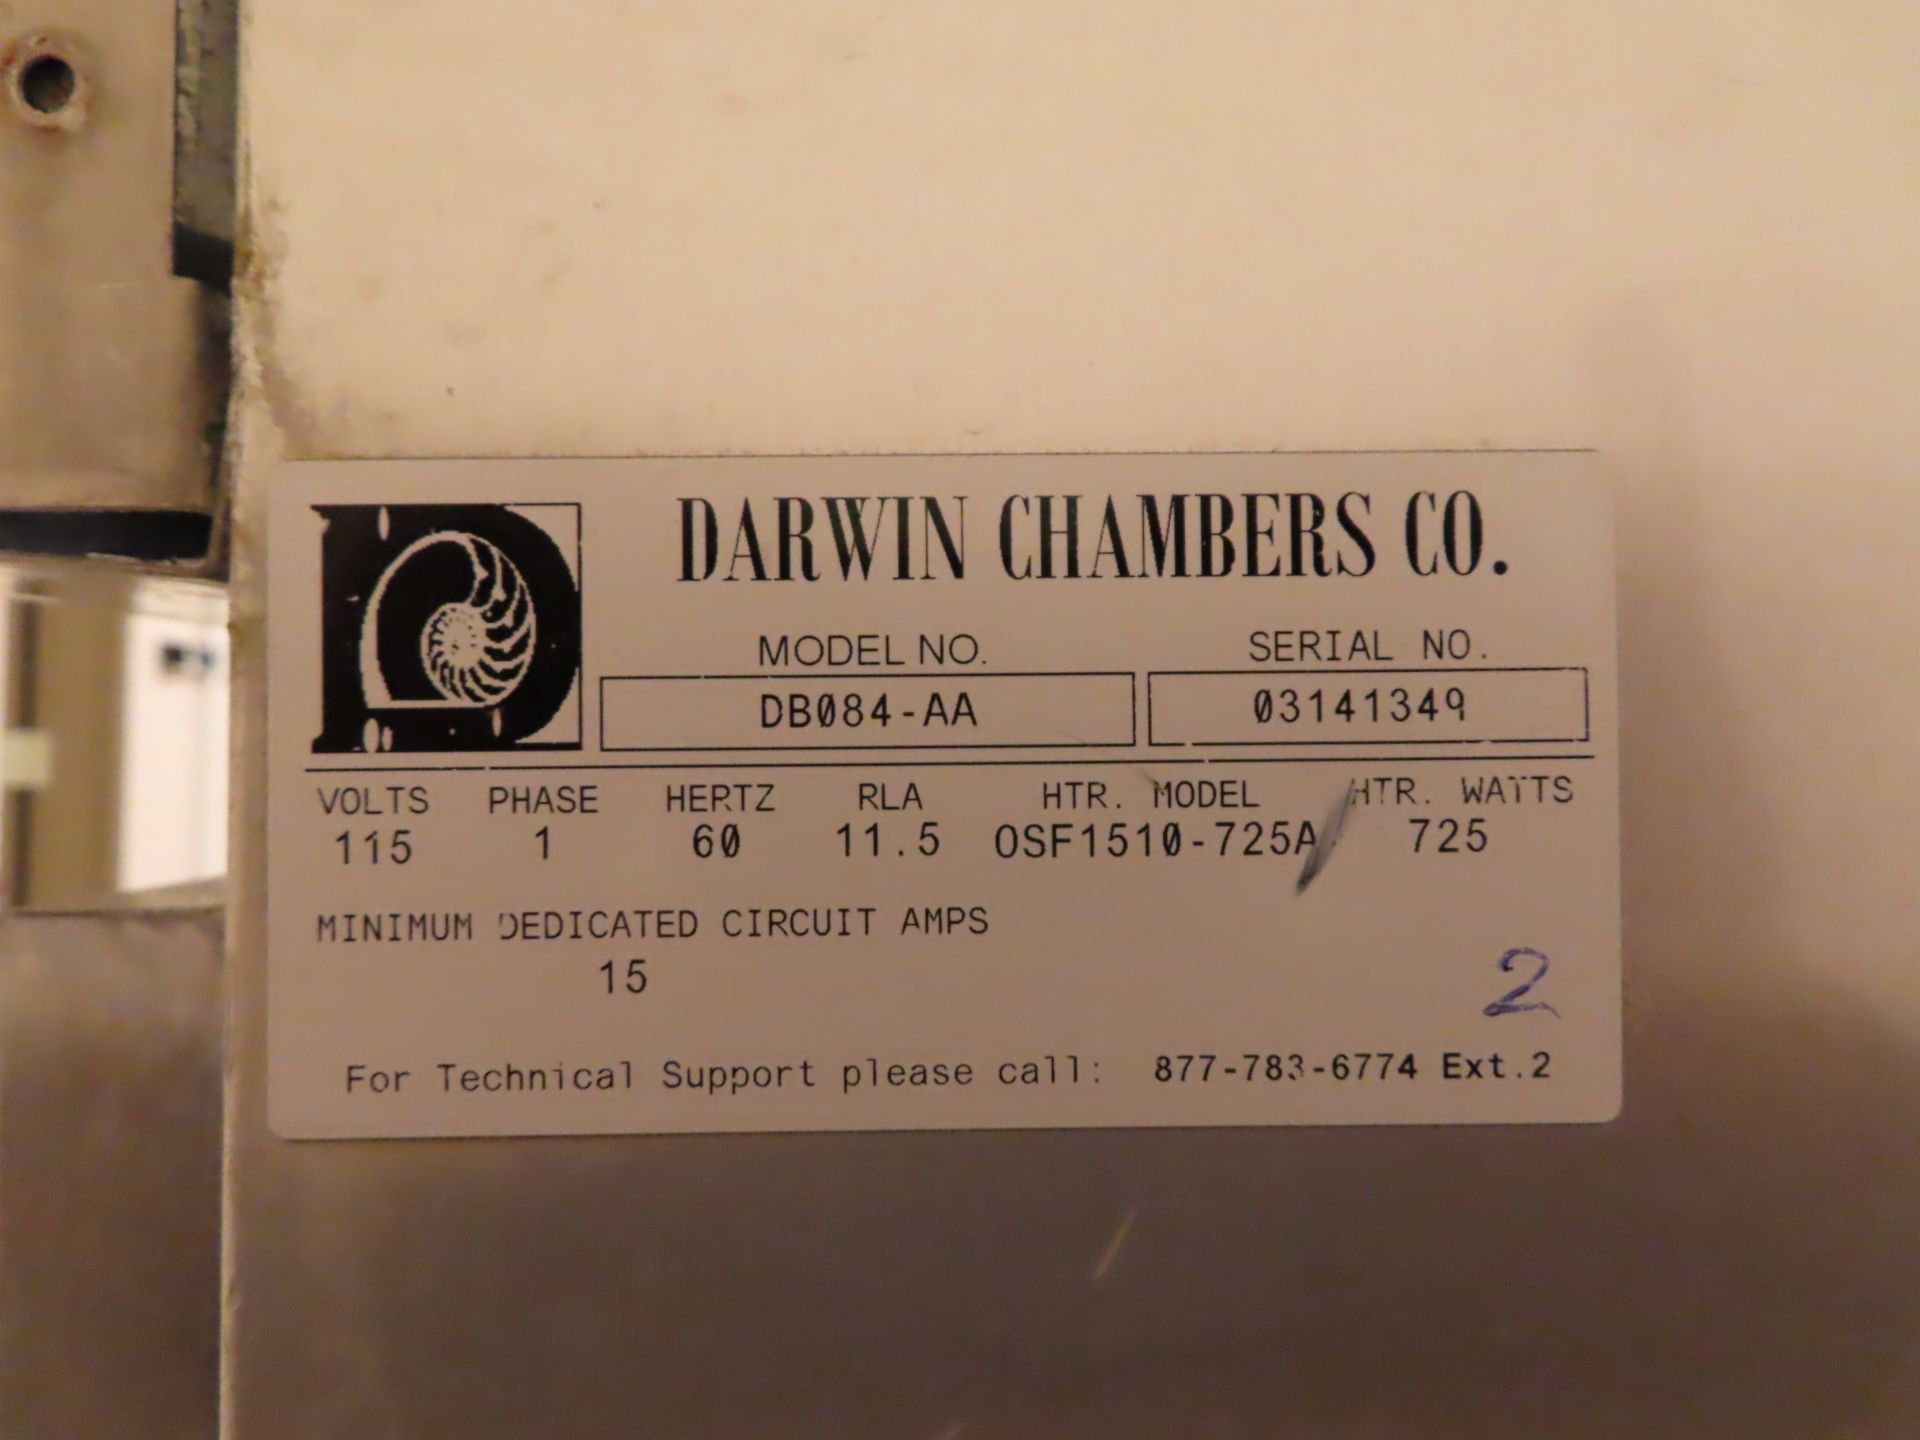 Darwin Chambers model DB084-AA stainless stability chamber, s/n 03141349, 3 door with (3) baskets - Image 3 of 3